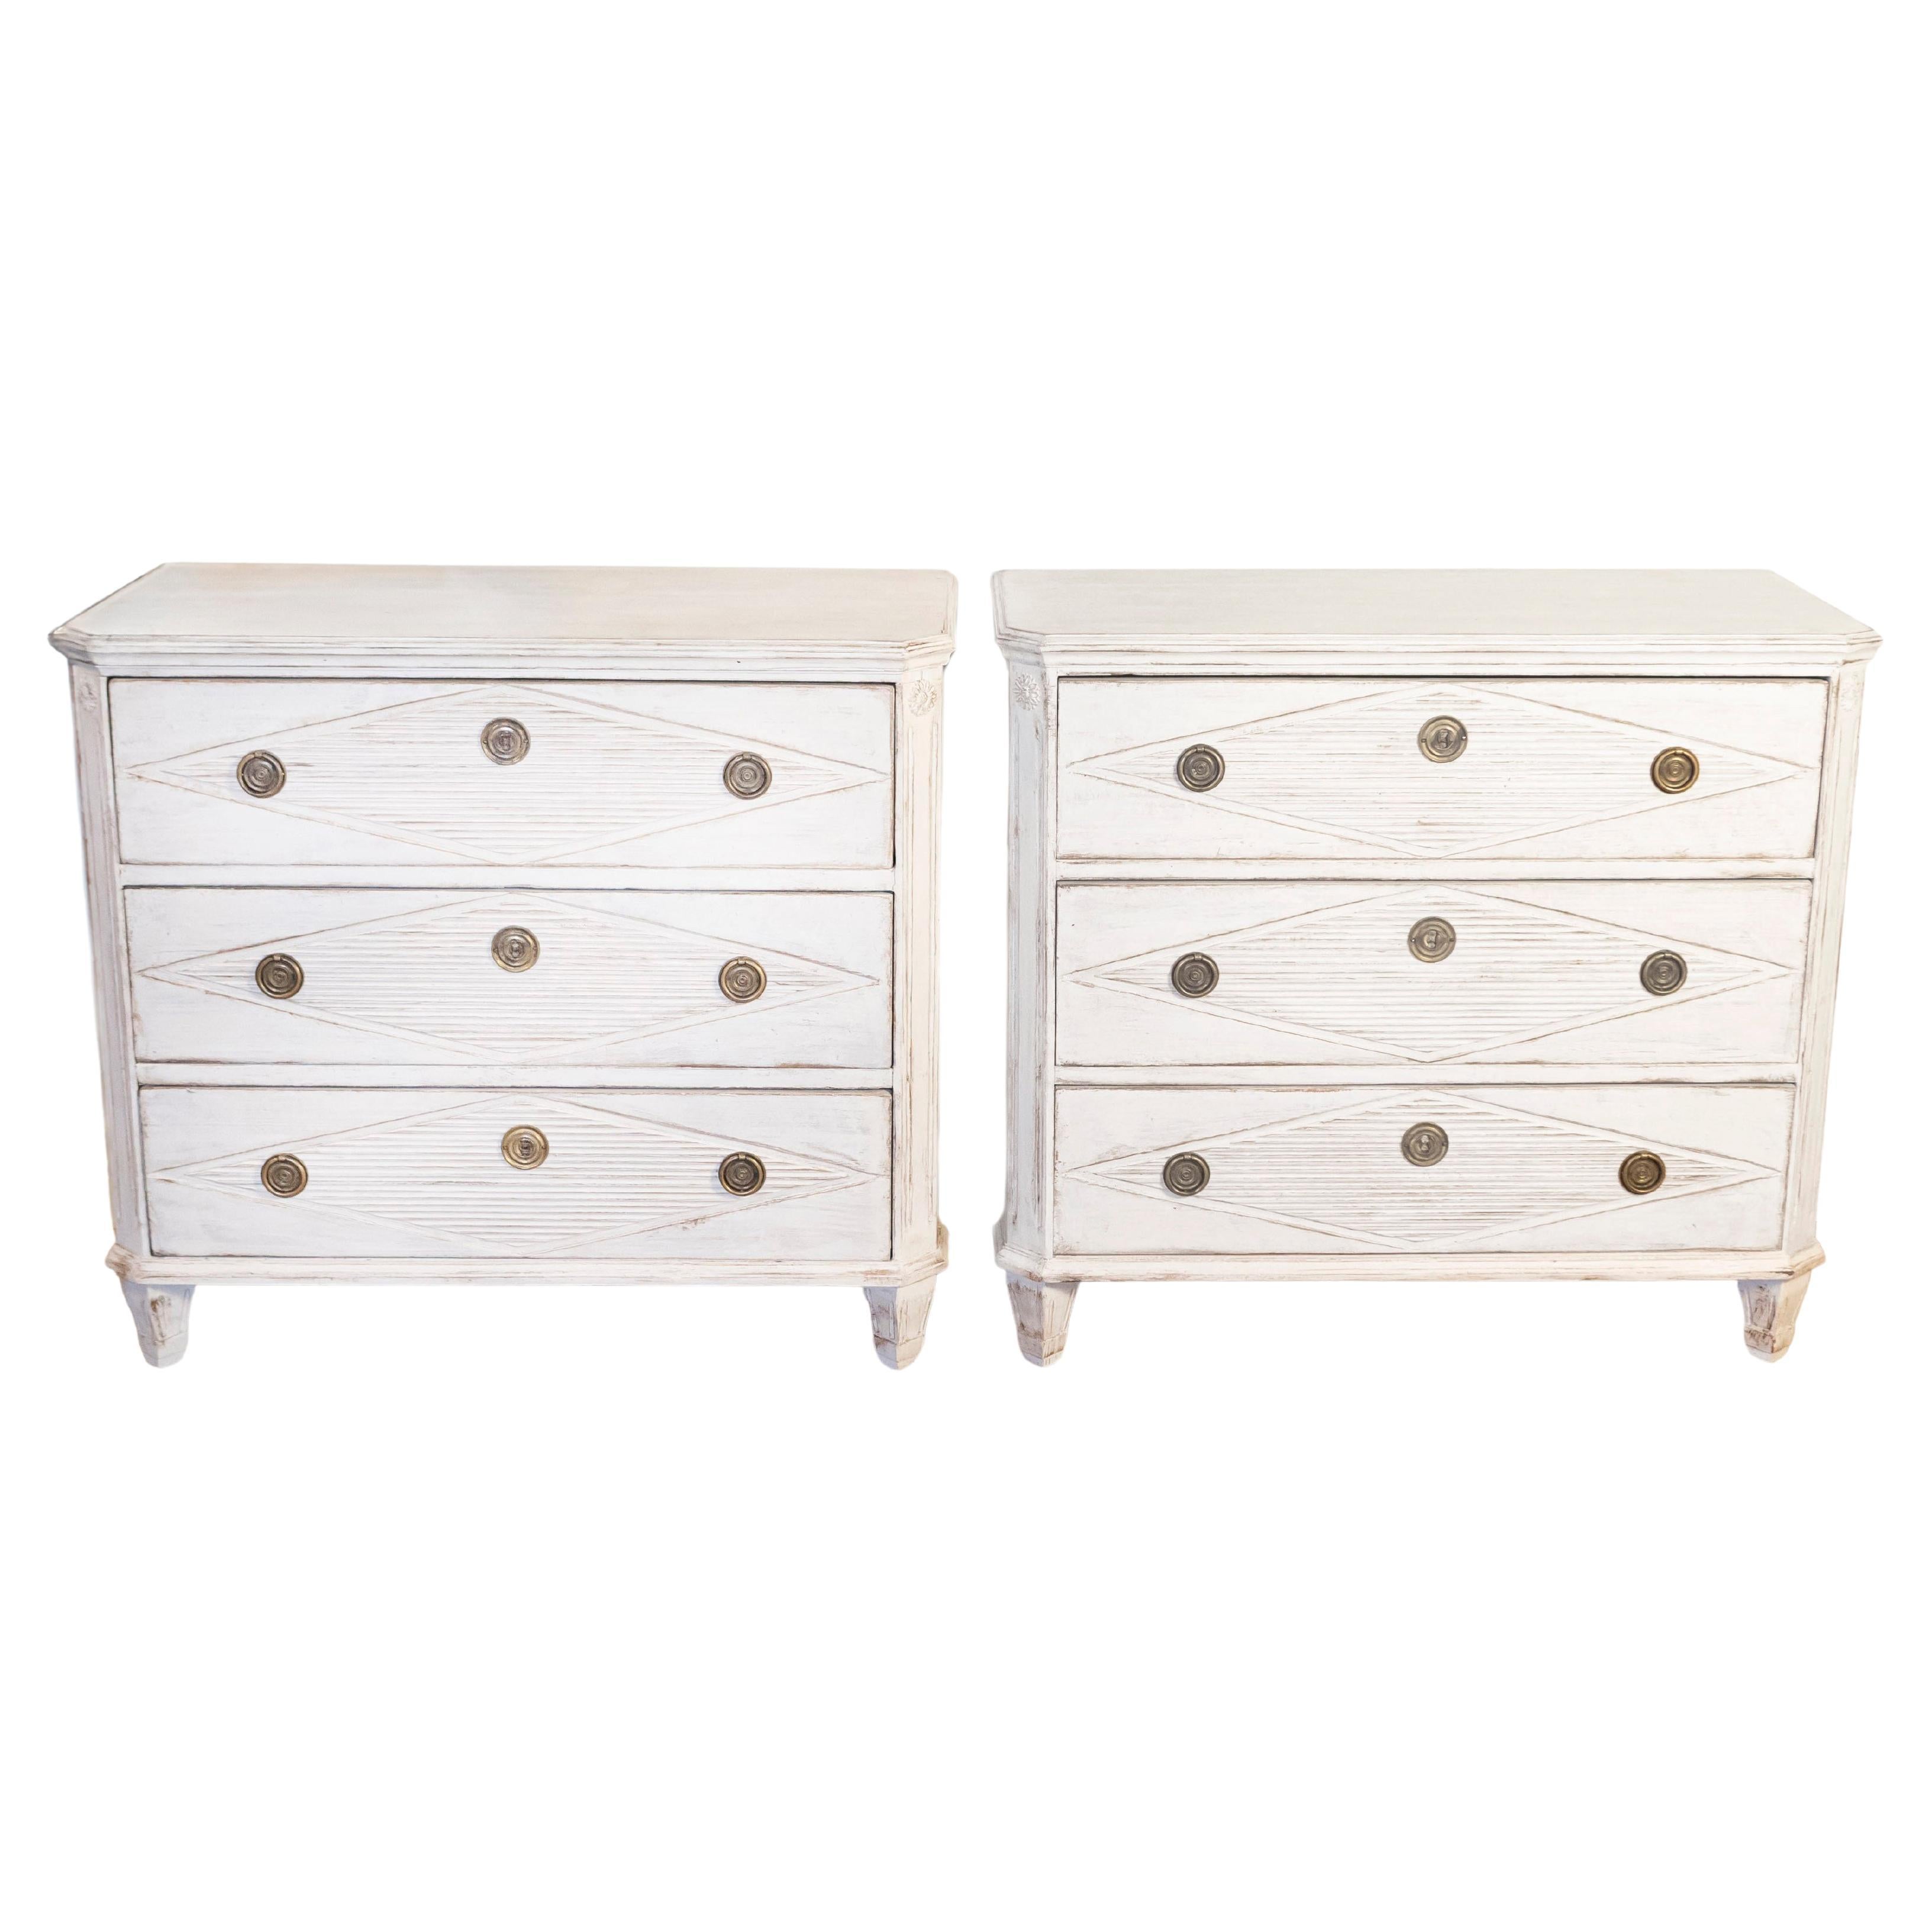 Gustavian Style 19th Century Painted Chests with Carved Diamond Motifs, a Pair